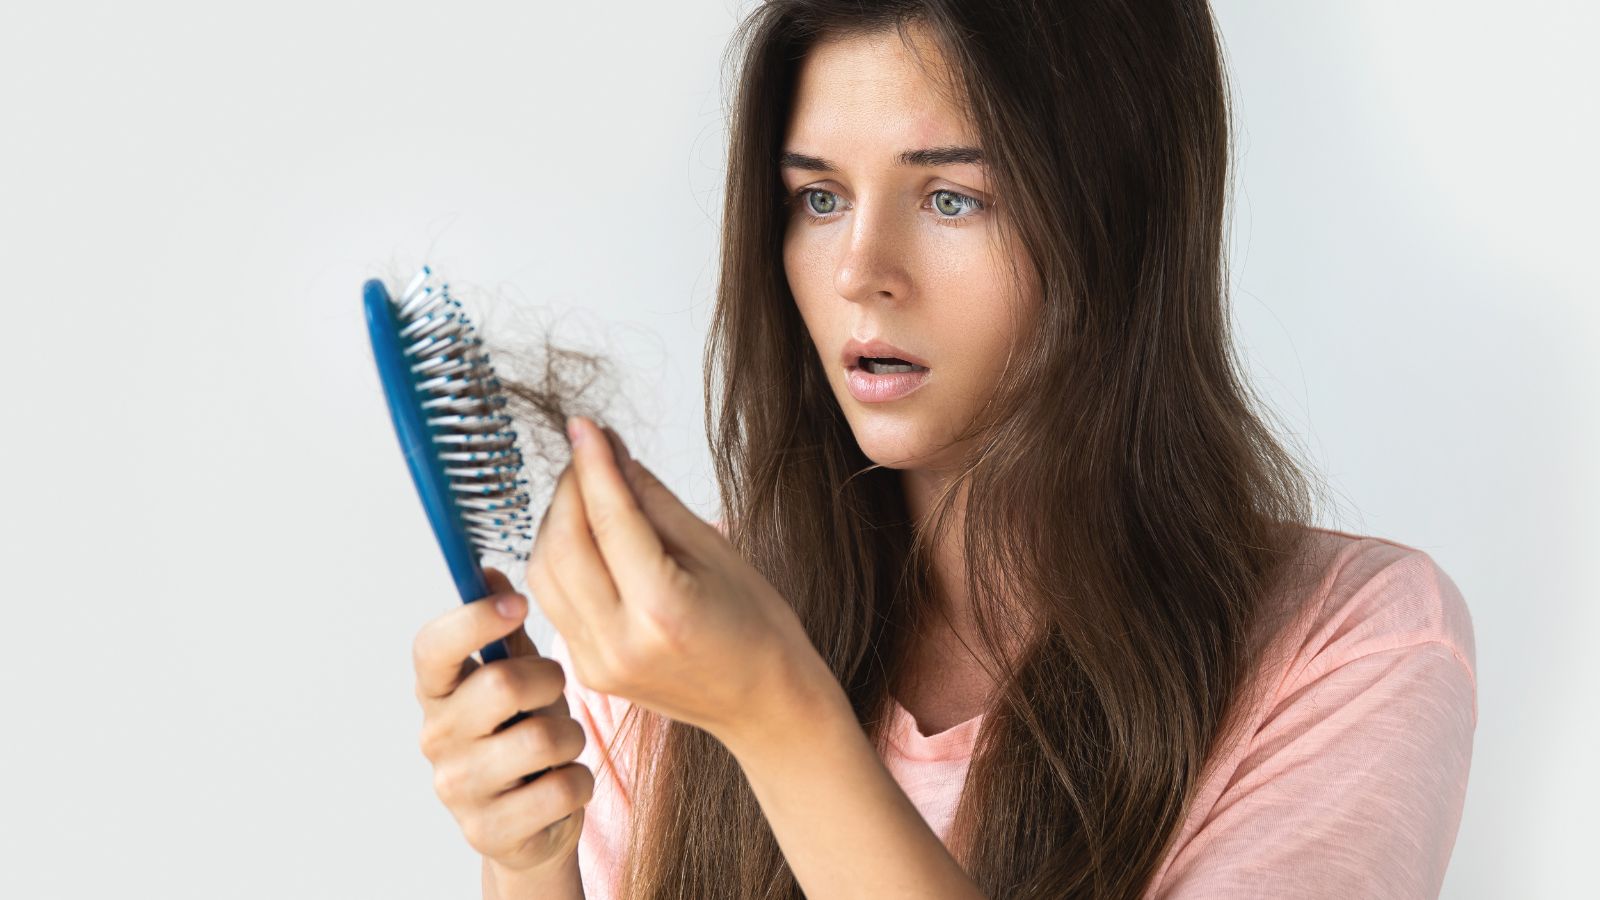 Woman holding a comb and worried.